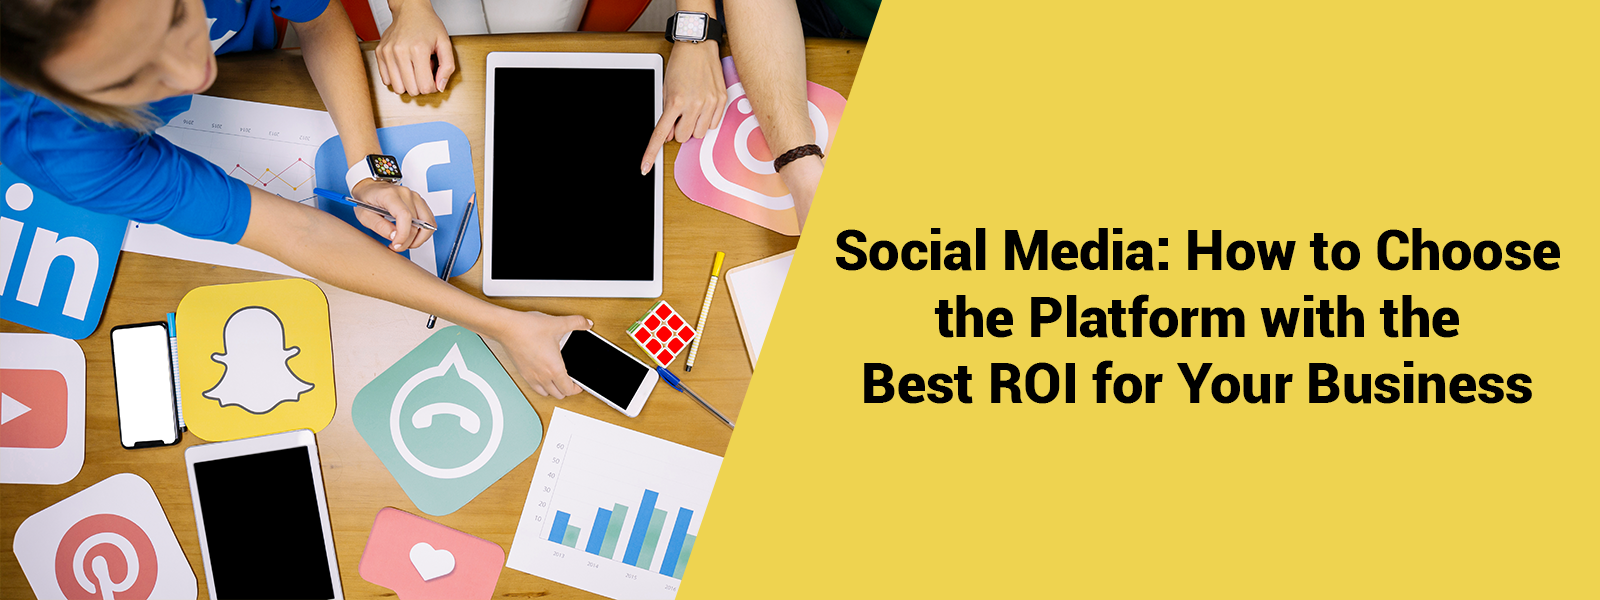 Social Media: How to Choose the Platform with the Best ROI for Your Business